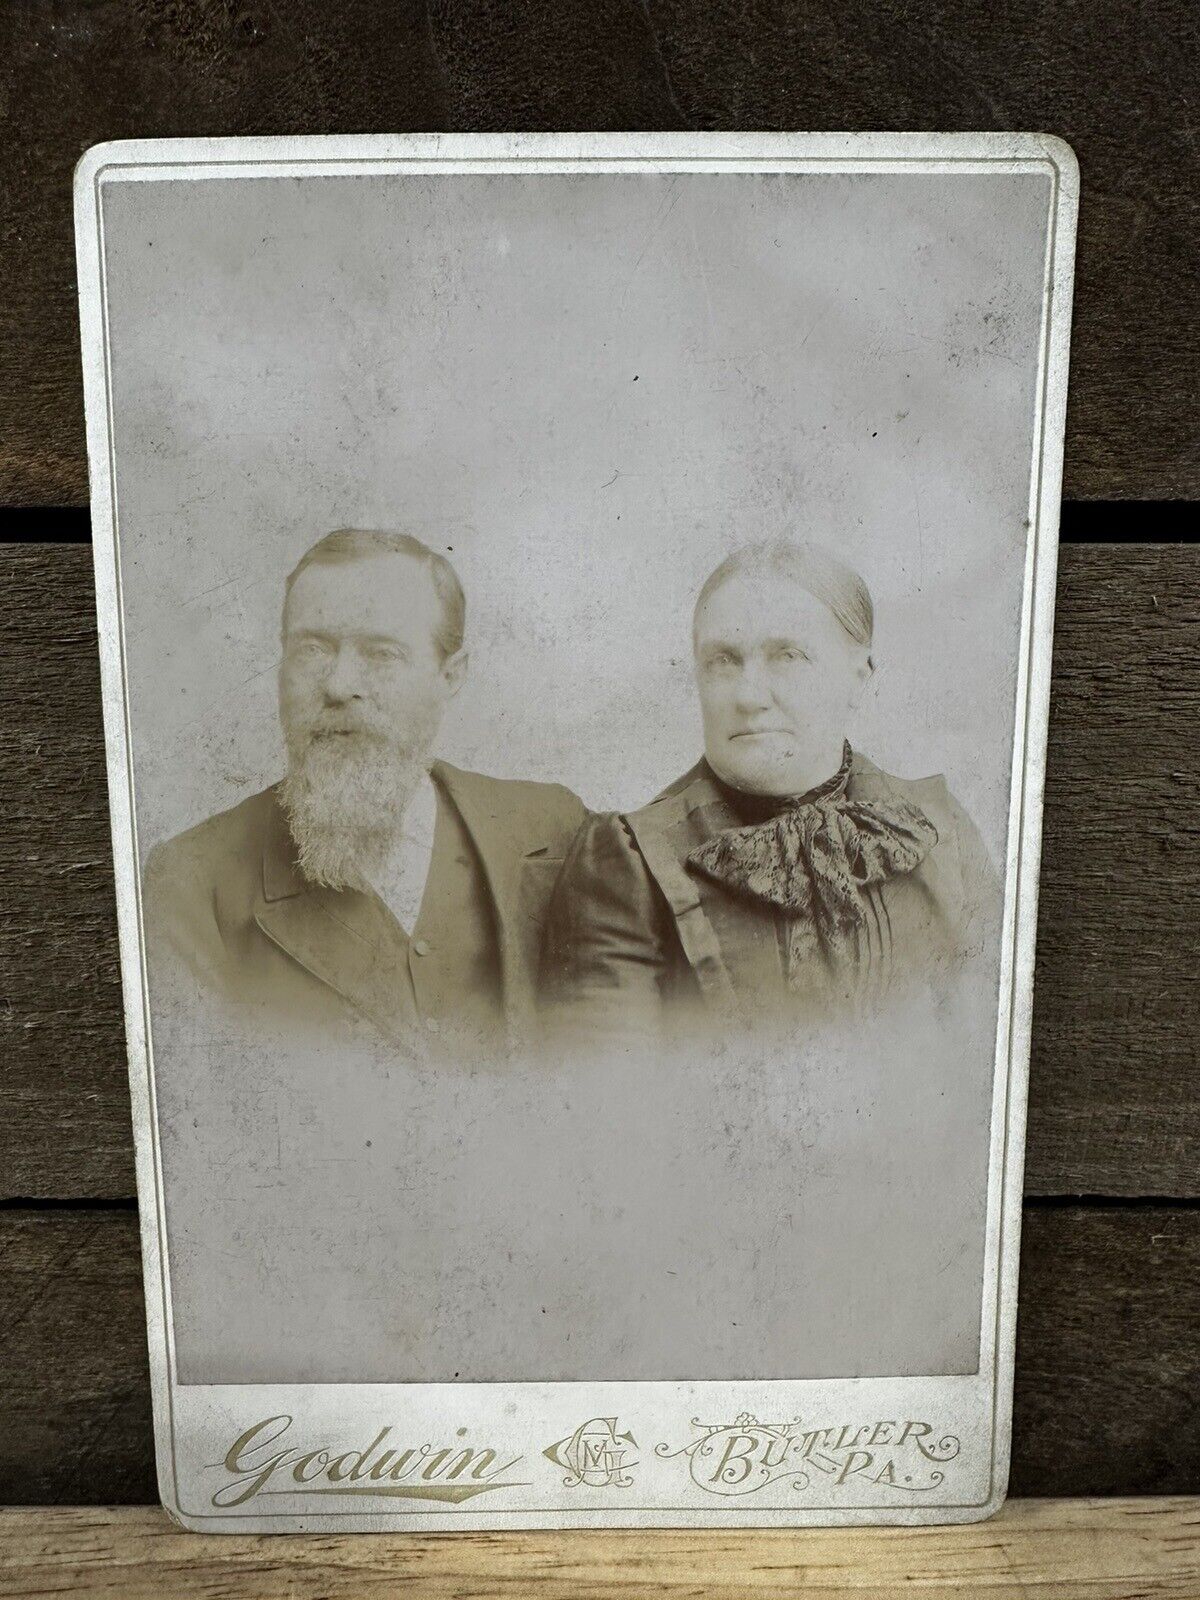 Antique Victorian Cabinet Card Of A Man & Woman By “Godwin” Butler, PA